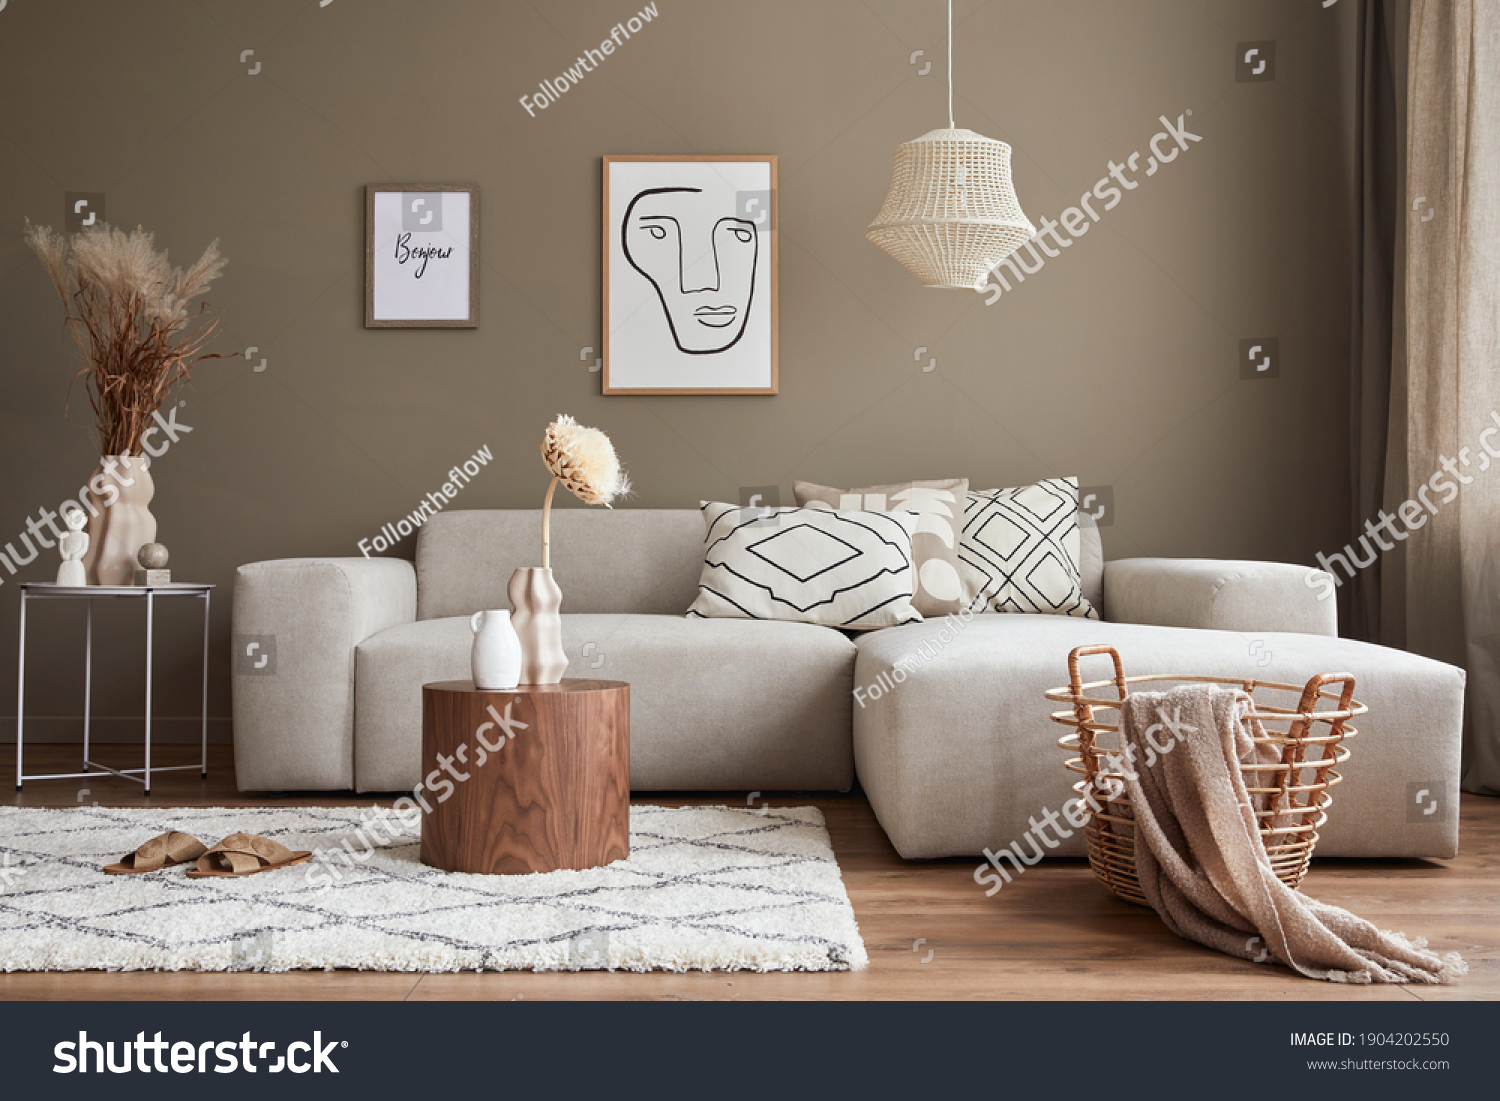 Interior design of stylish living room with modern neutral sofa, mock up poster farmes, dried flowers in vase, coffee tables, decoration and elegant personal accessories in home decor. Template. #1904202550